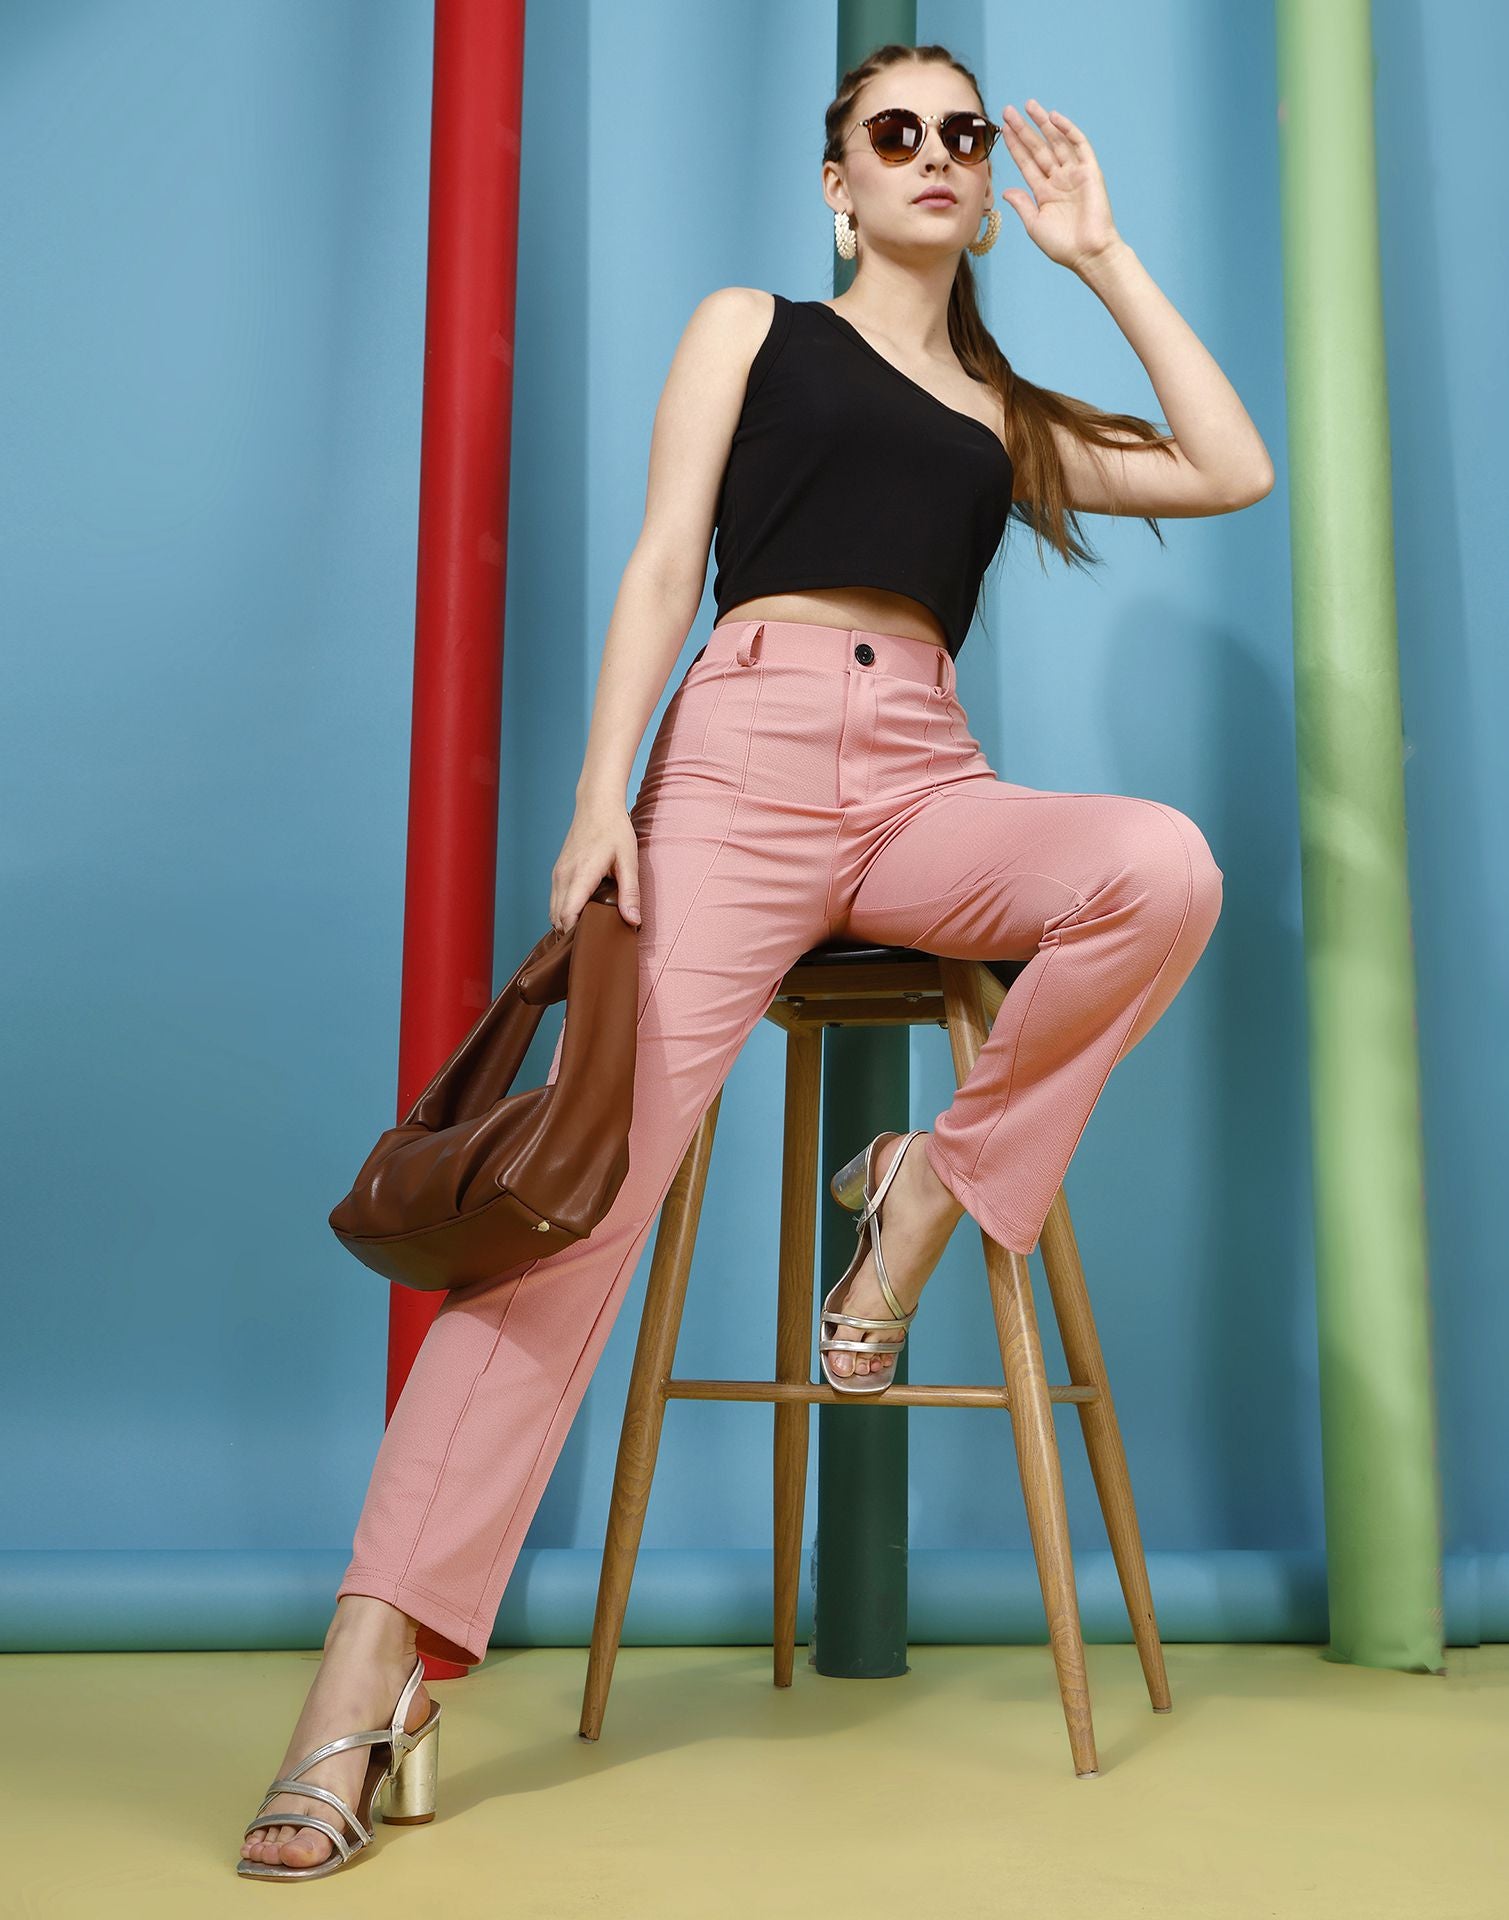 Peach Linen Trousers | Linen Trousers - Style Cheat